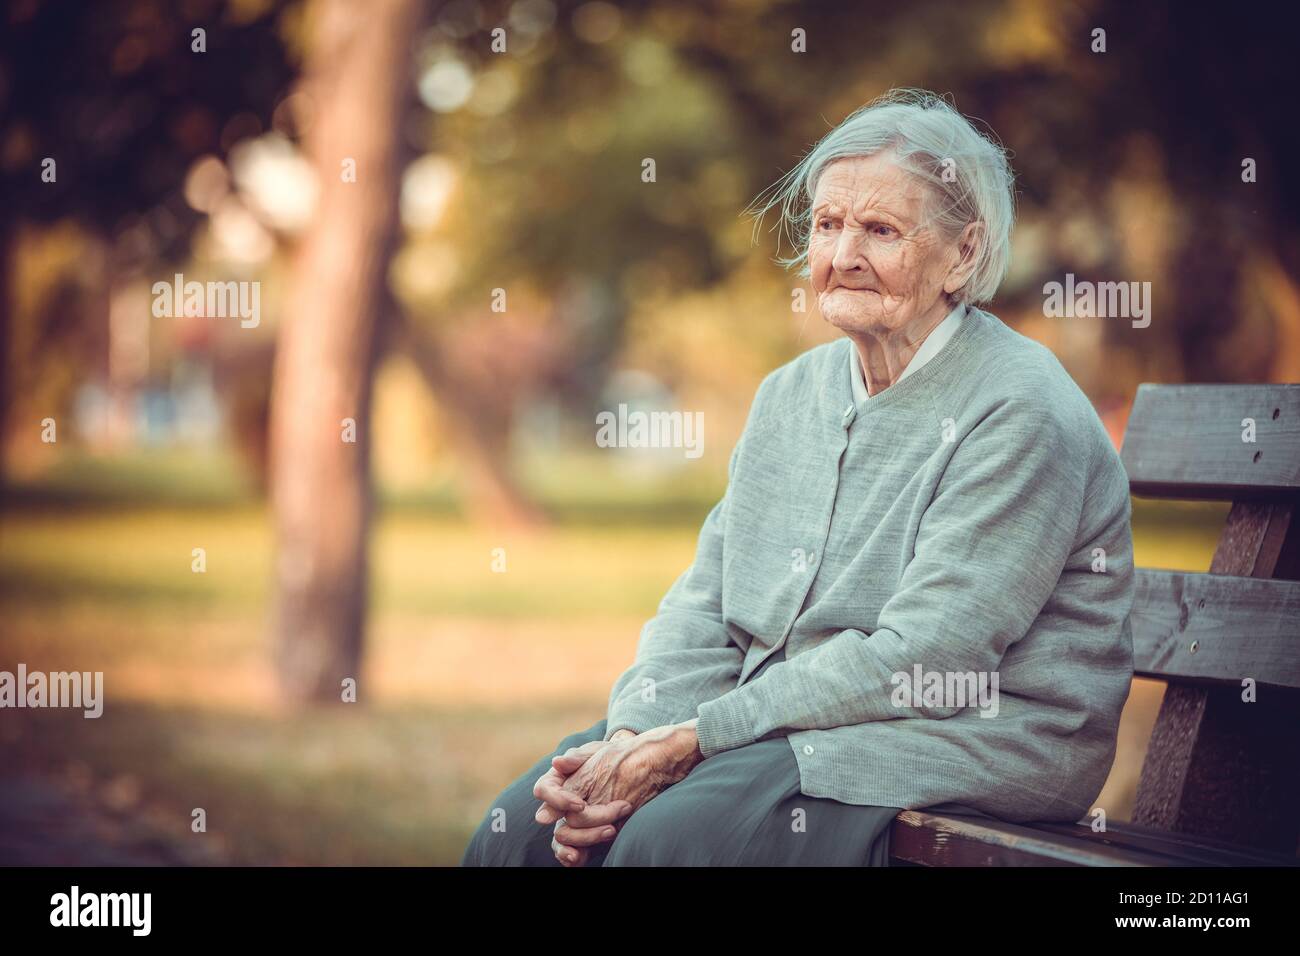 Portrait of senior woman sitting on bench in autumn park. Old lady feeling lonely and sad. Frustrated aged female outdoors. Stock Photo